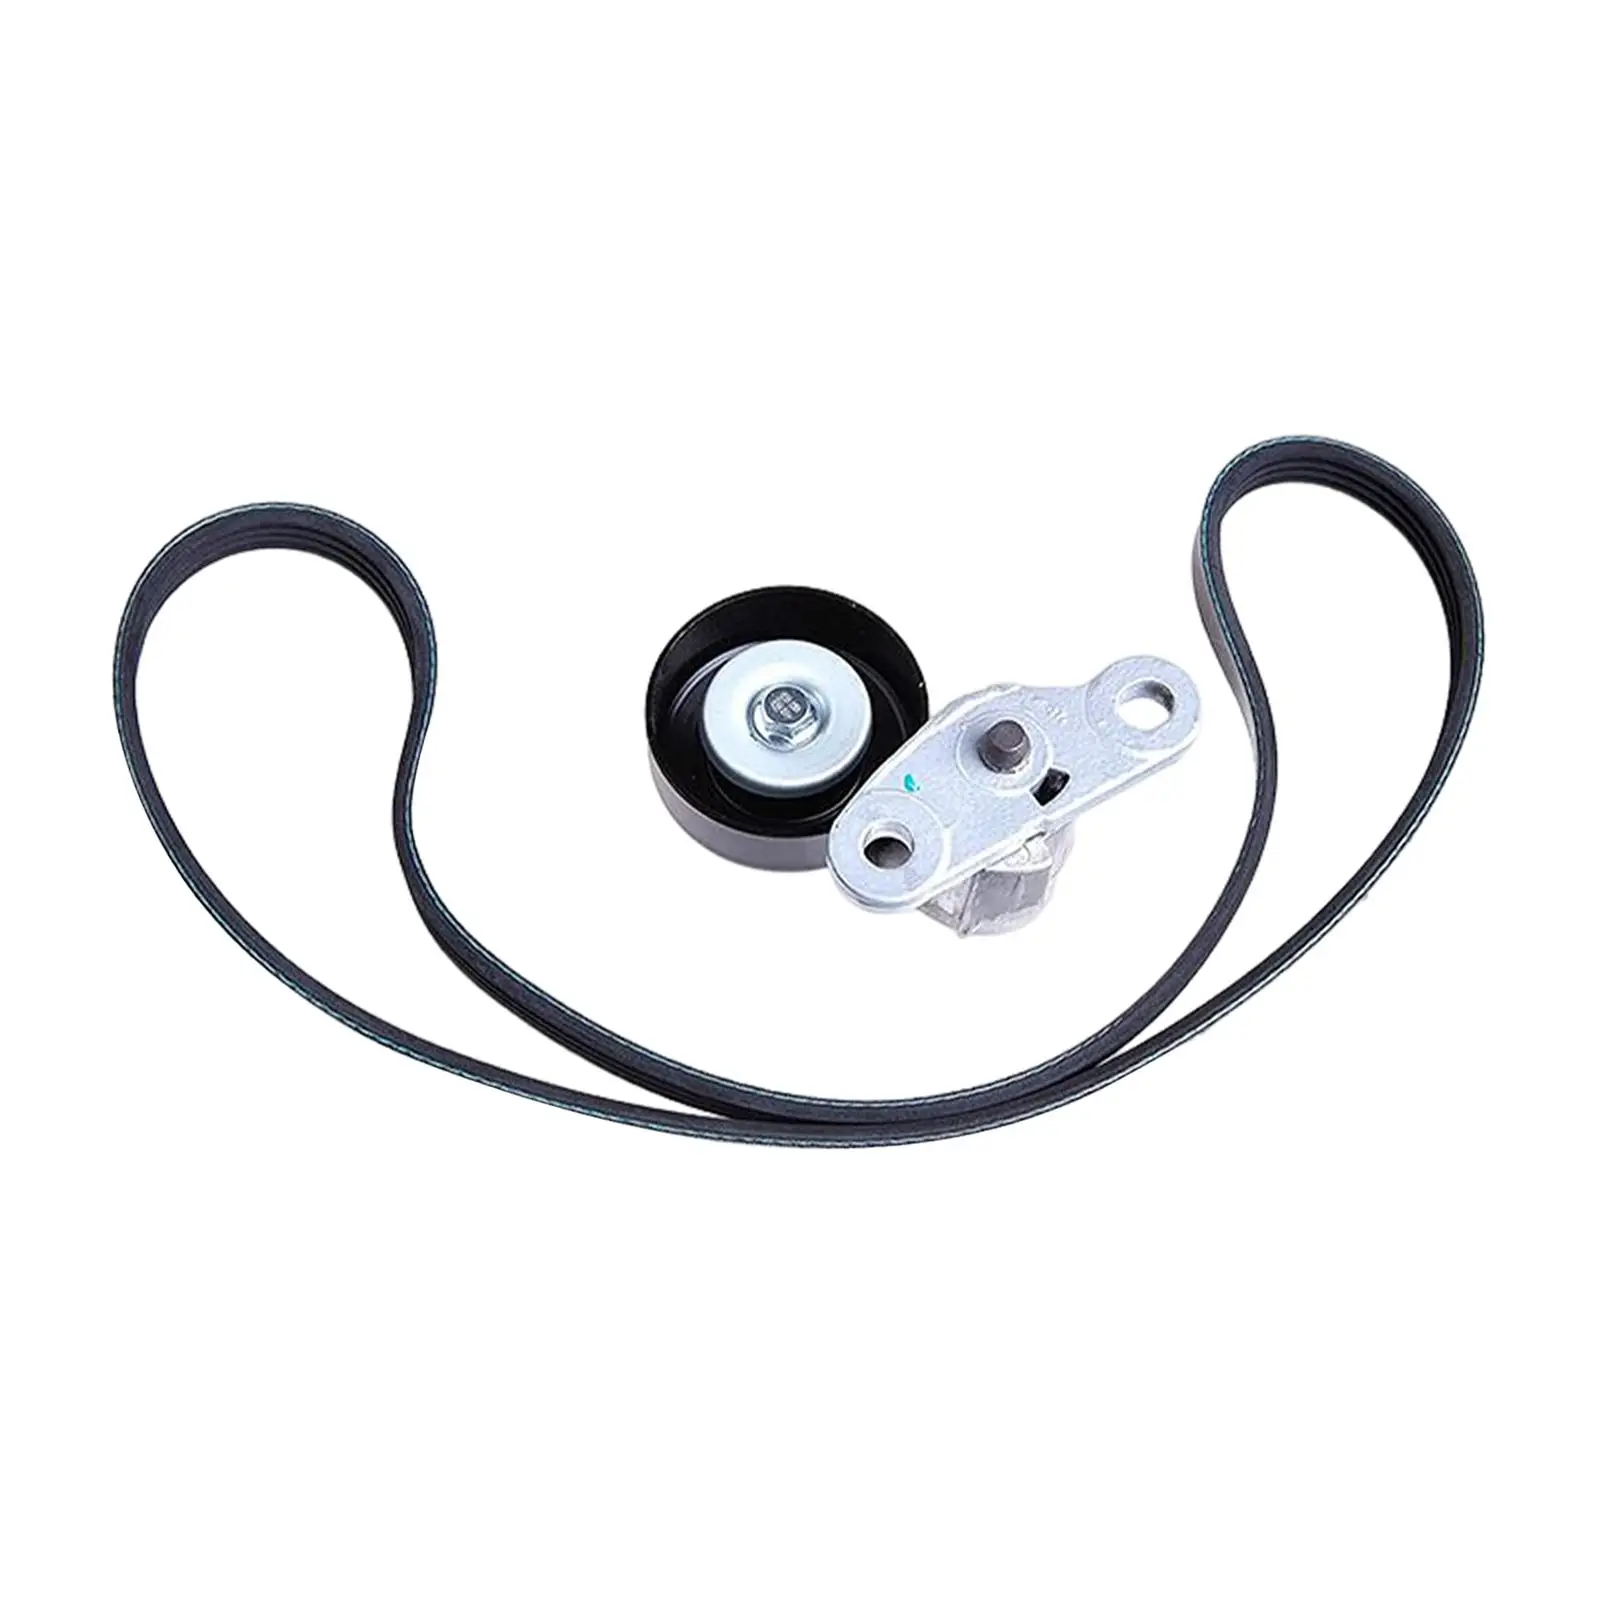 Drive Belt Tensioner Kit Repair Parts Replace Part for 1500 2500 3500 High Performance